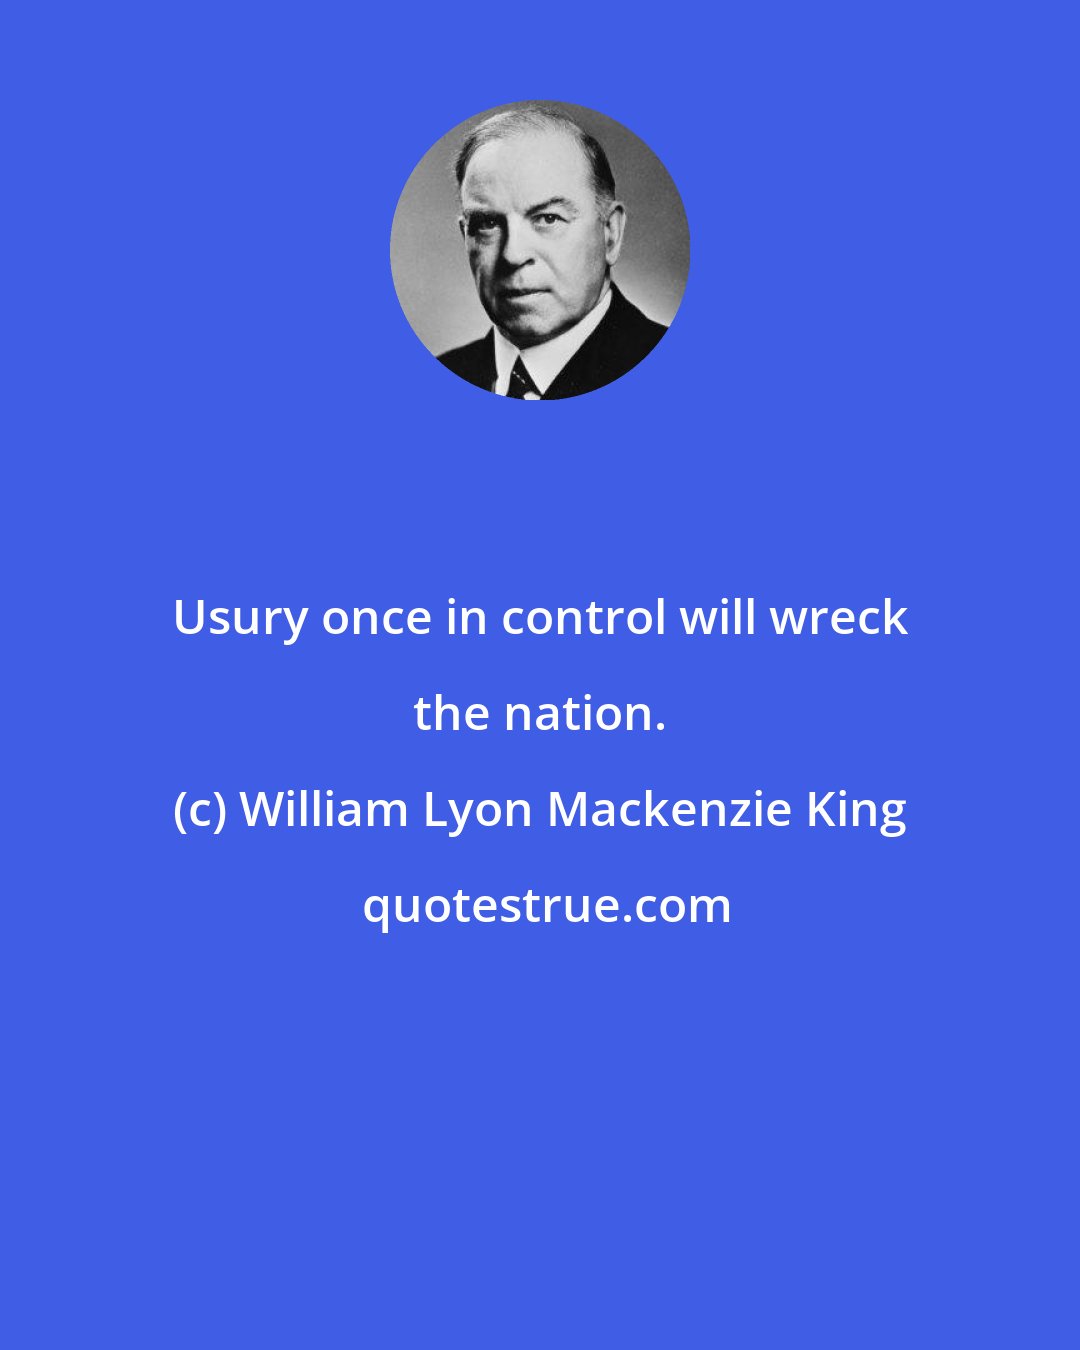 William Lyon Mackenzie King: Usury once in control will wreck the nation.